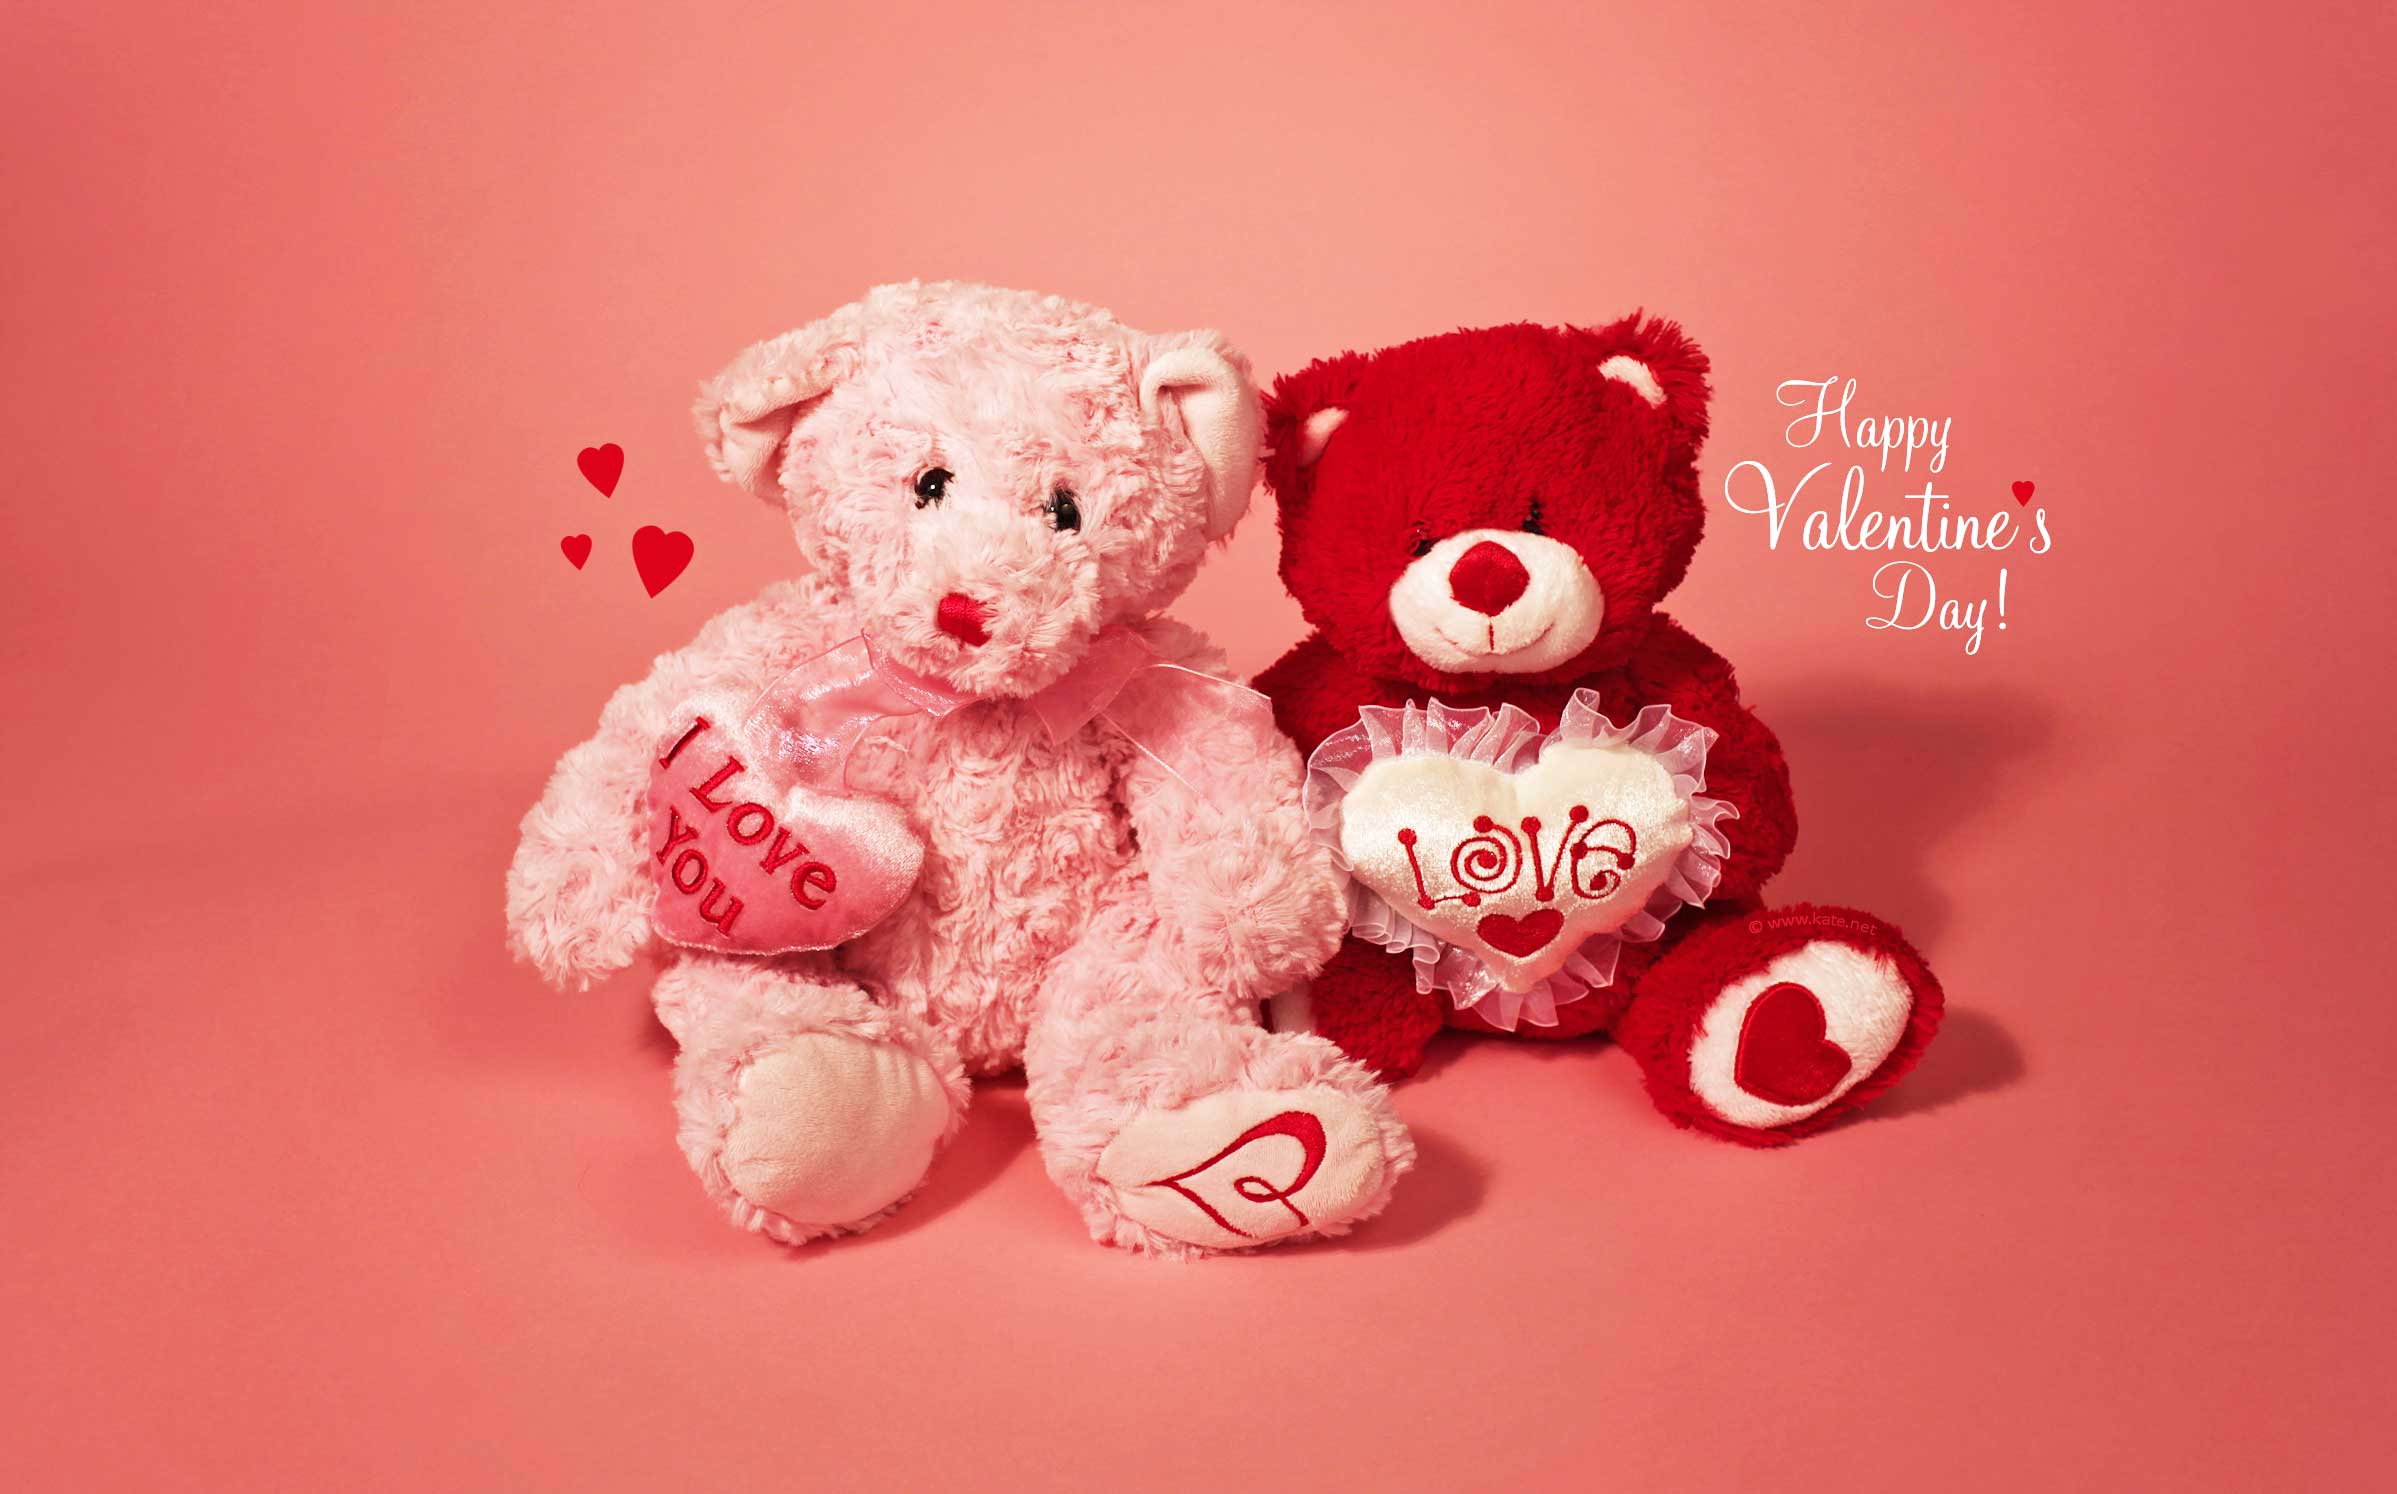 Romantic valentines day quotes and sayings (1)